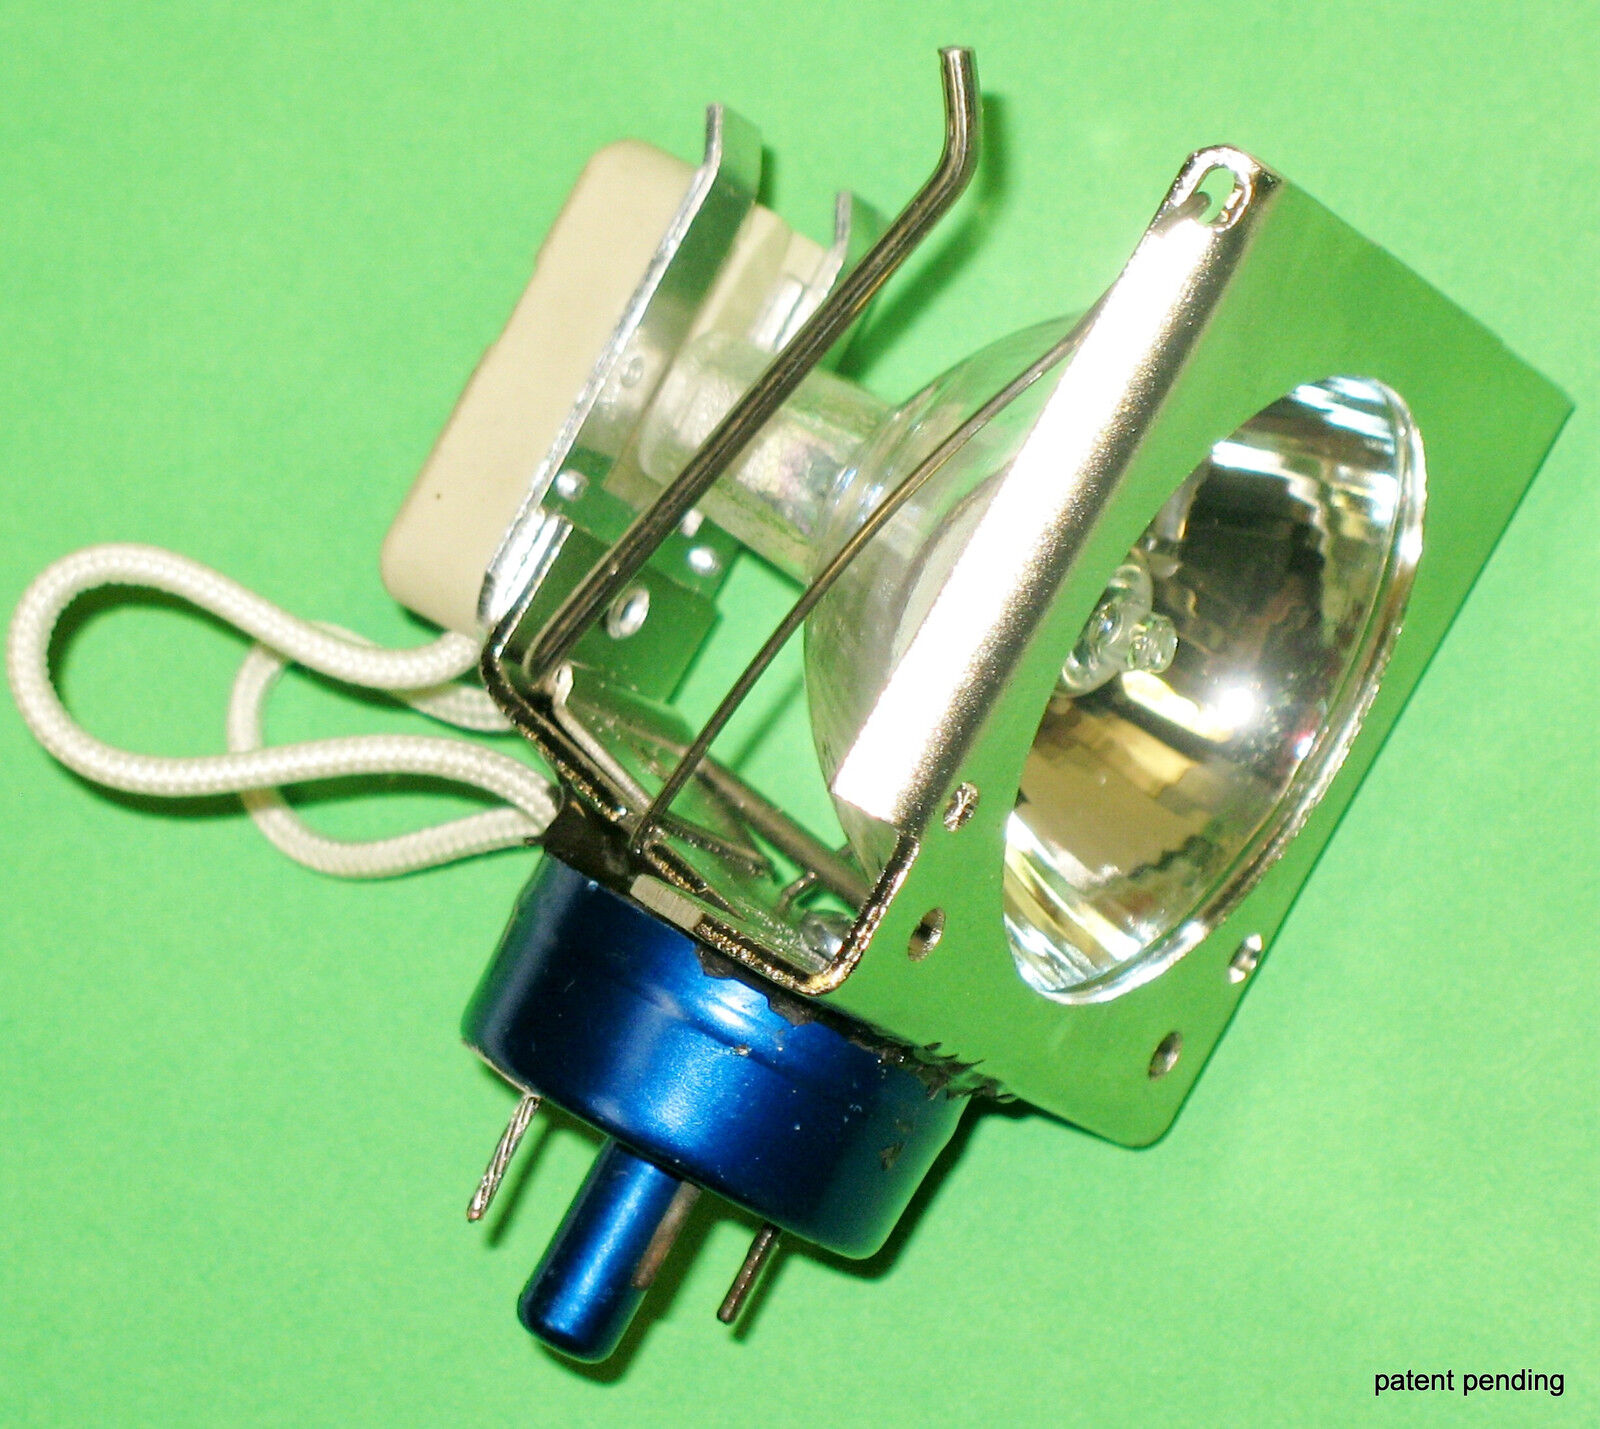 HALOGEN DJL Projector Lamp Plug-in Module replaces expensive 15 hour DJL bulb